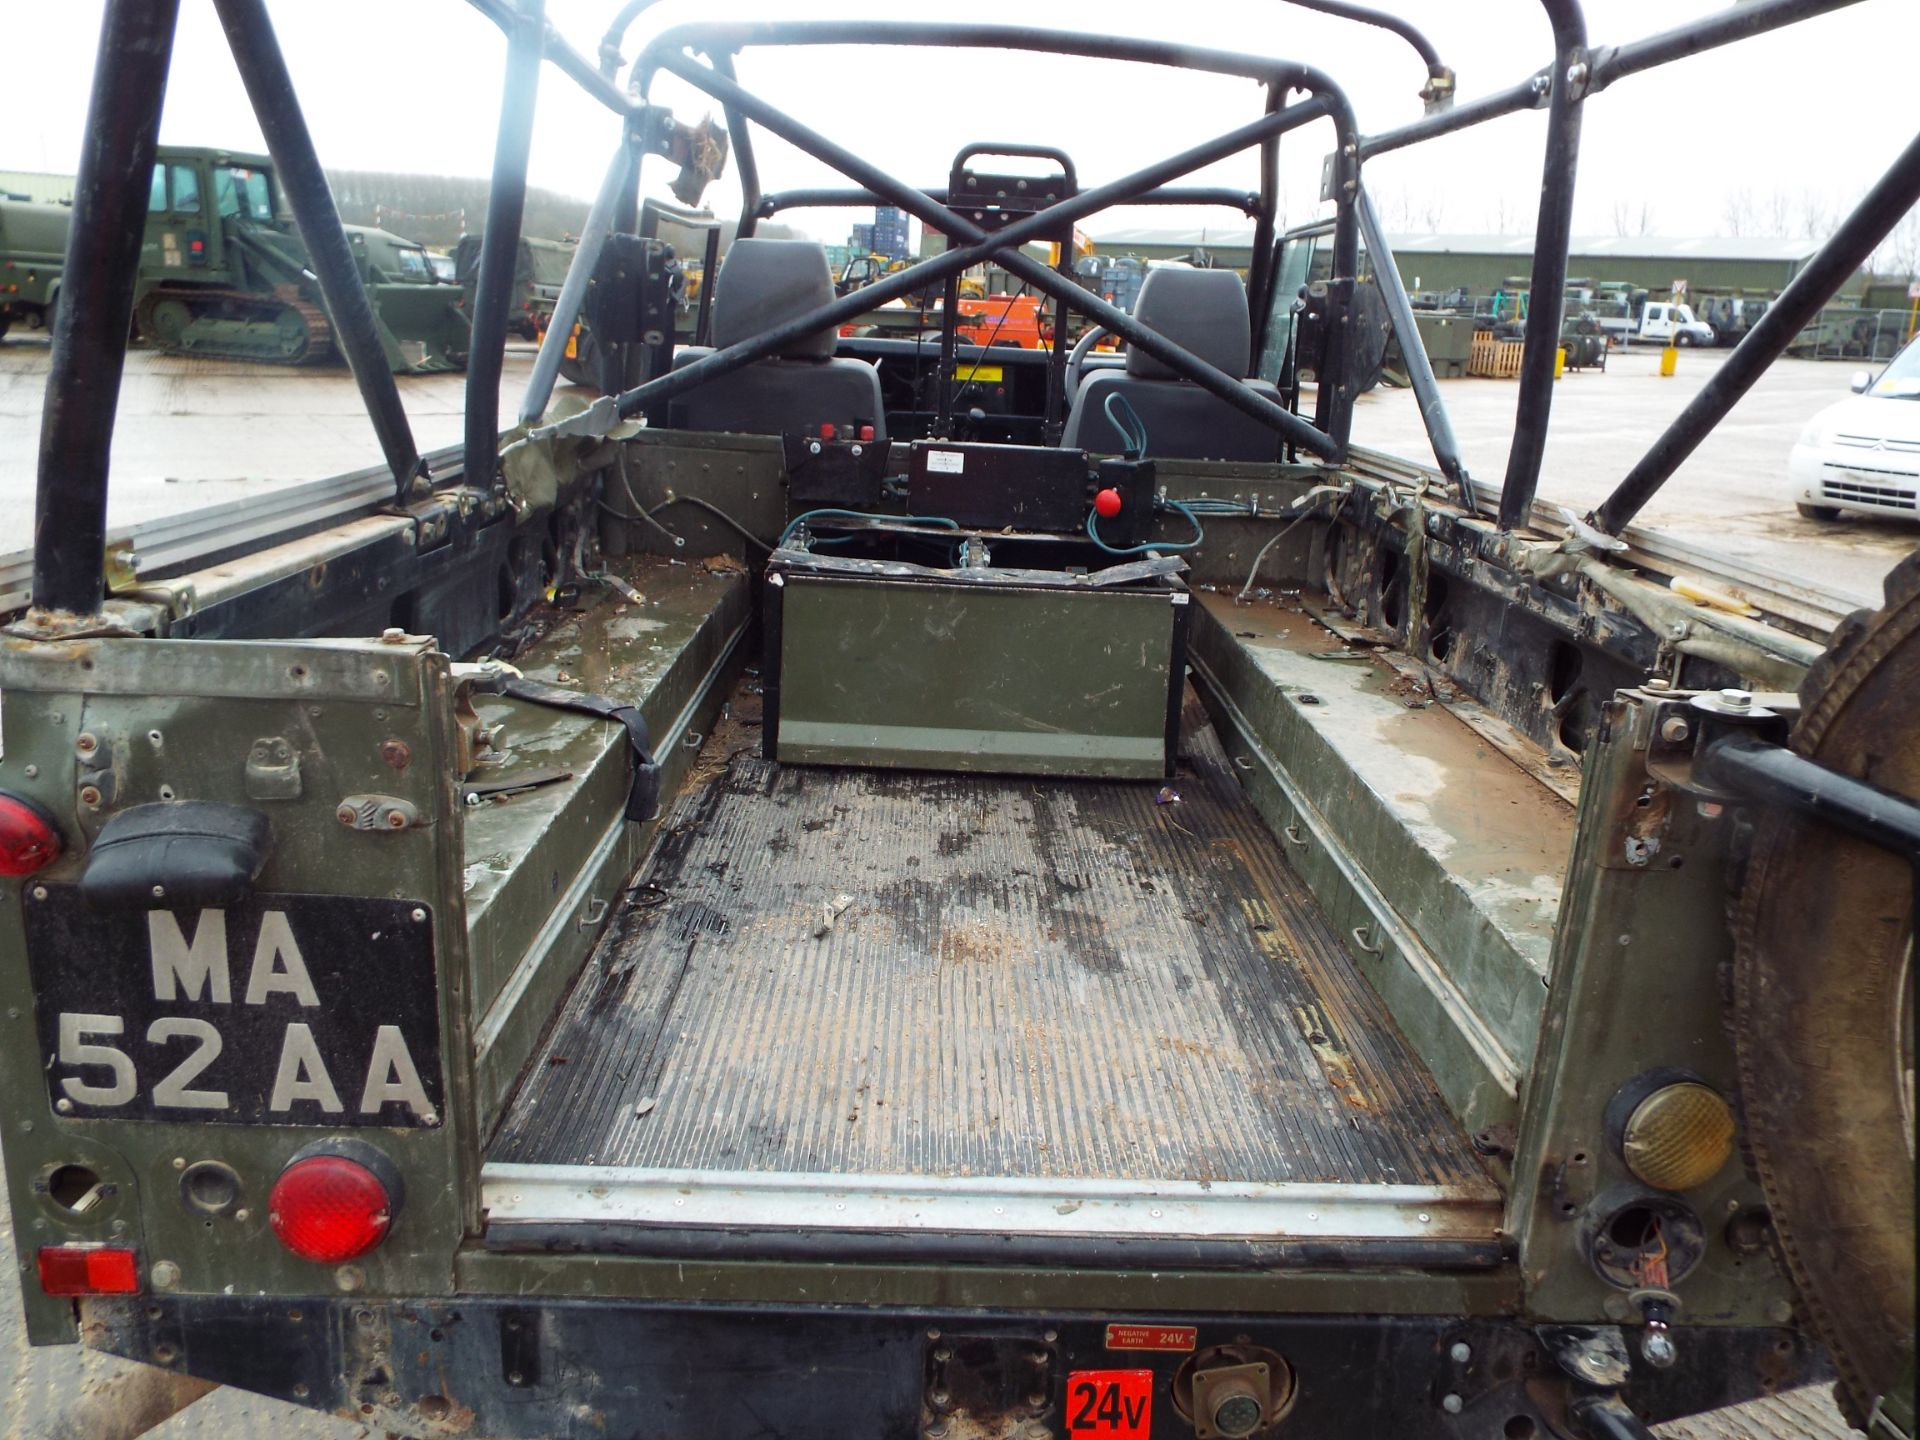 Military Specification Land Rover Wolf 110 Hard Top - Image 15 of 27